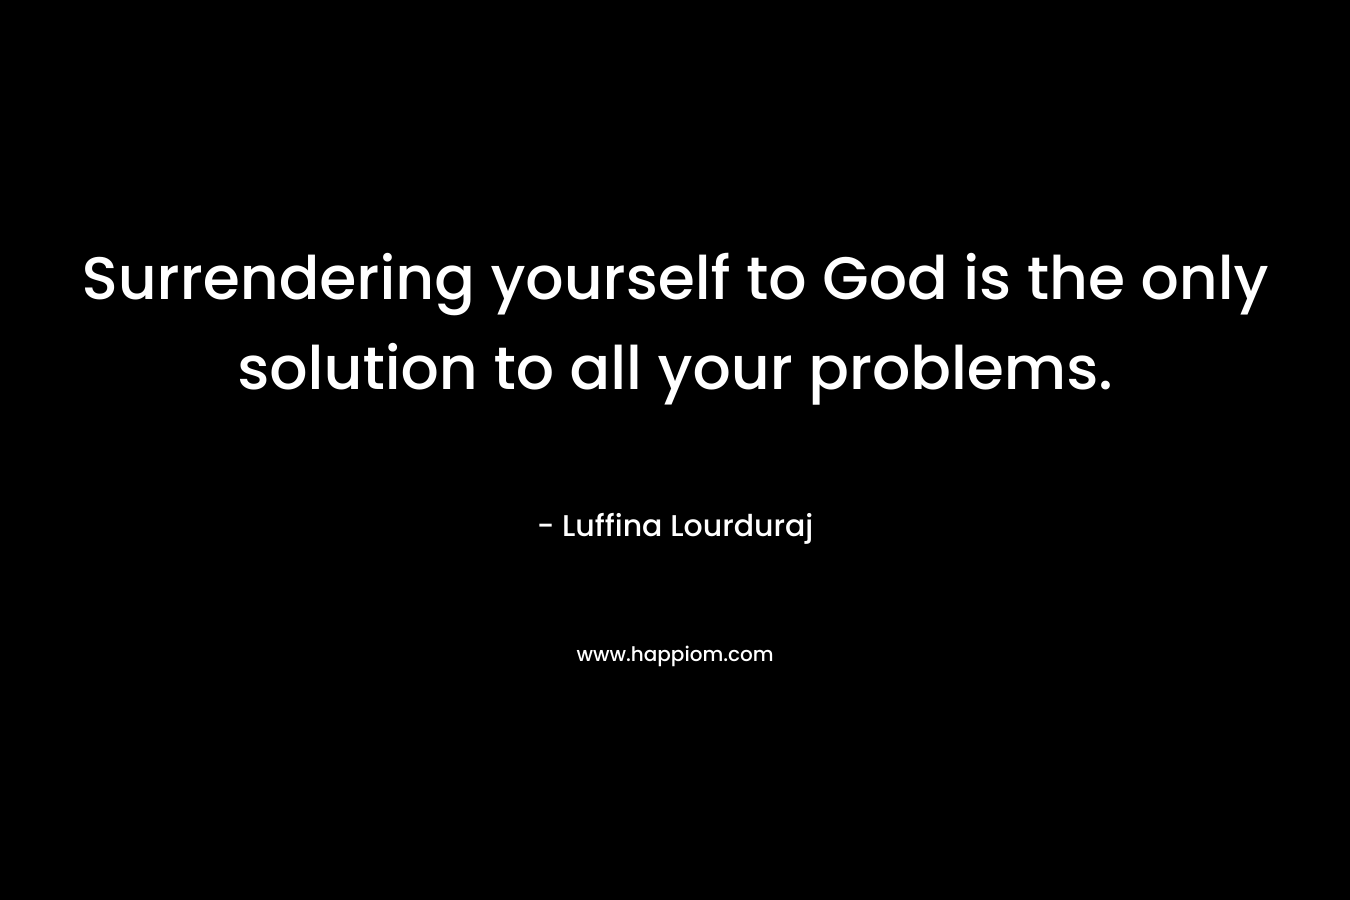 Surrendering yourself to God is the only solution to all your problems.